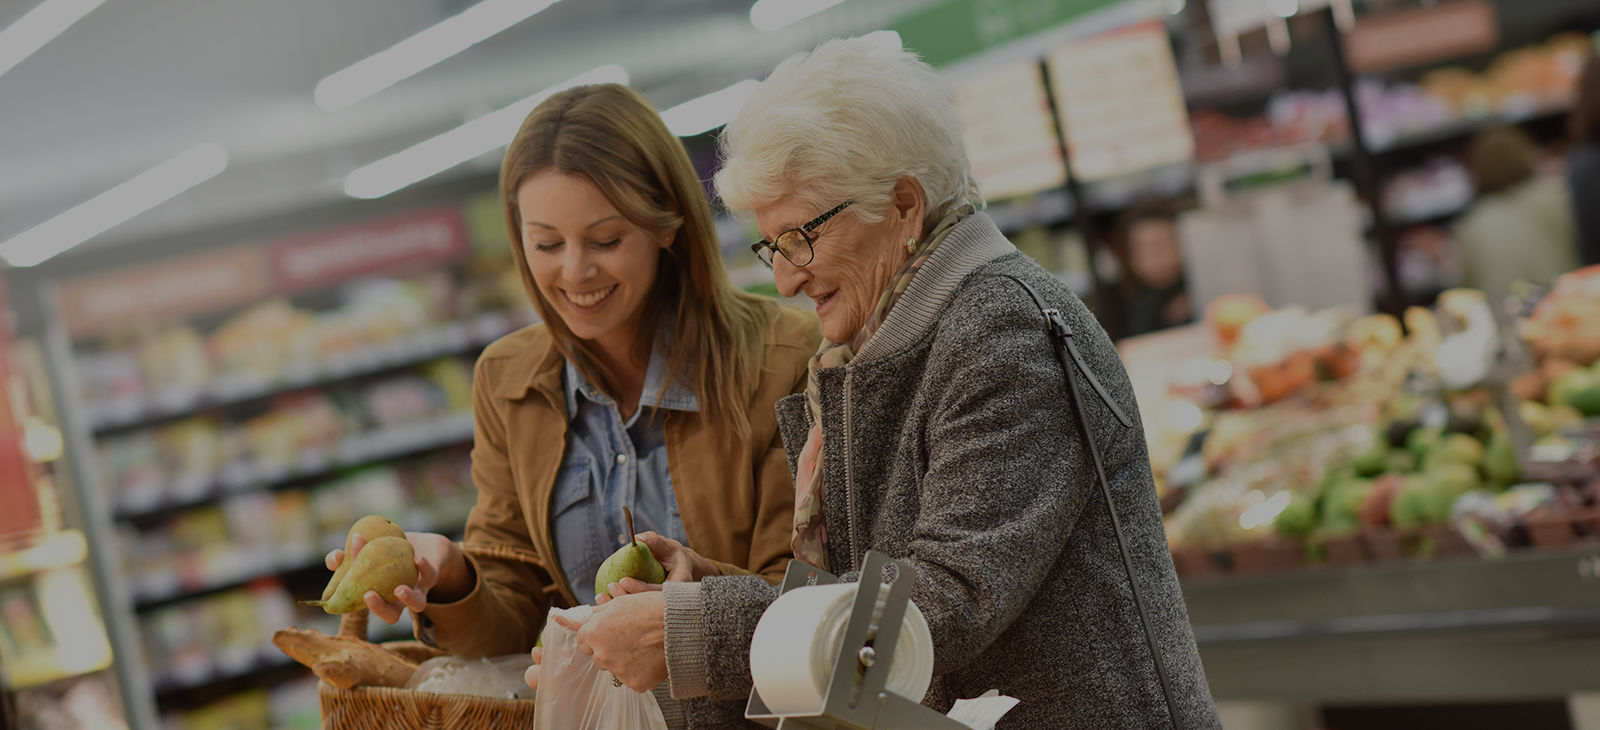 A woman and an elderly woman shopping in a grocery store.